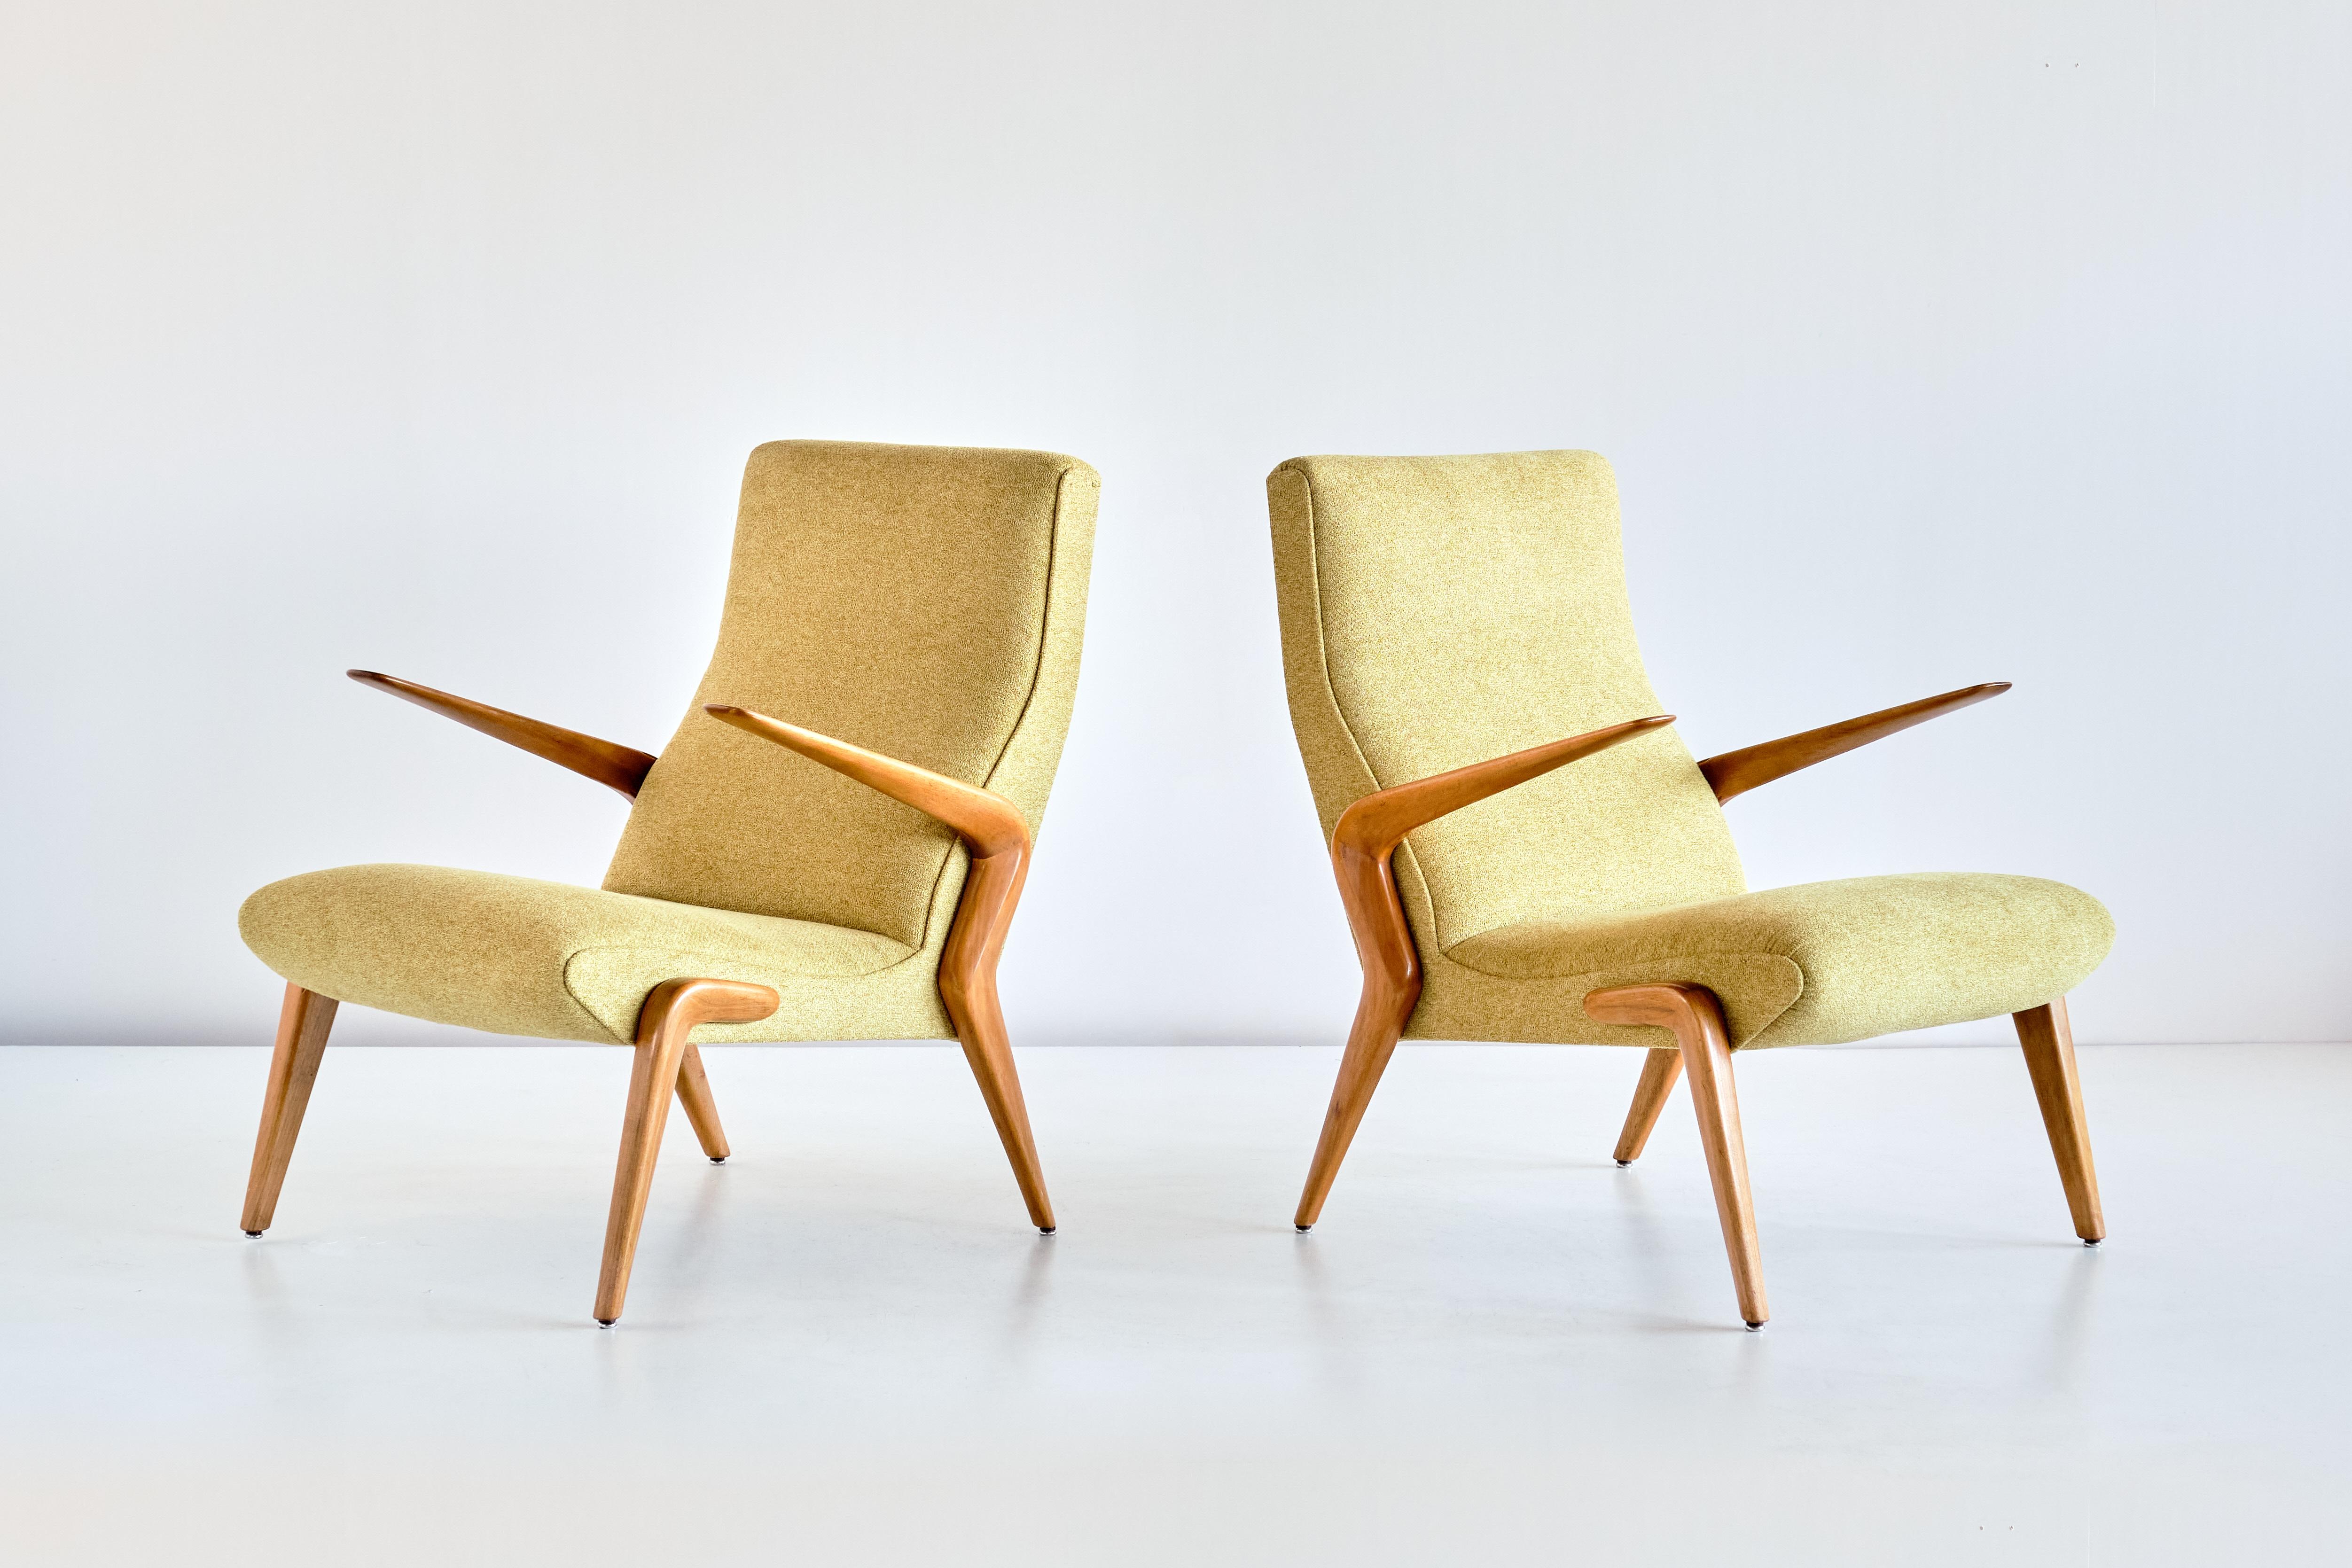 This important pair of armchairs was designed by Osvaldo Borsani and produced by Tecno in Como, Italy in 1954. The very rare P71 was one of the first designs produced by Tecno after the company was founded by Osvaldo Borsani and his brother